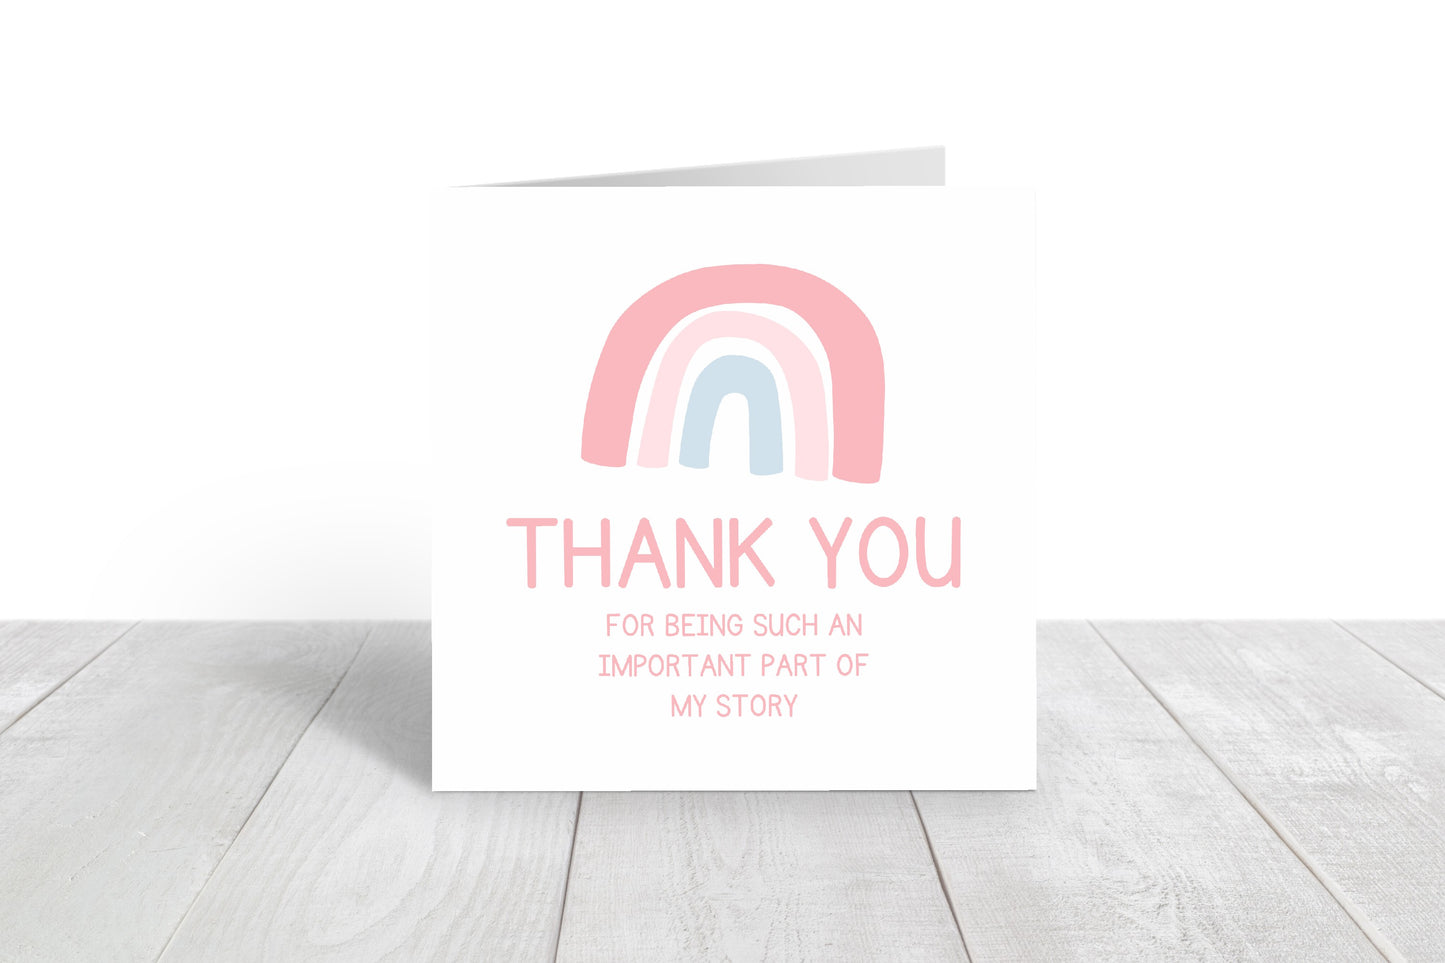 Teacher Card | Thank You For Being Such An Important Part Of My Story | Rainbow Thank You Card (Design 1)